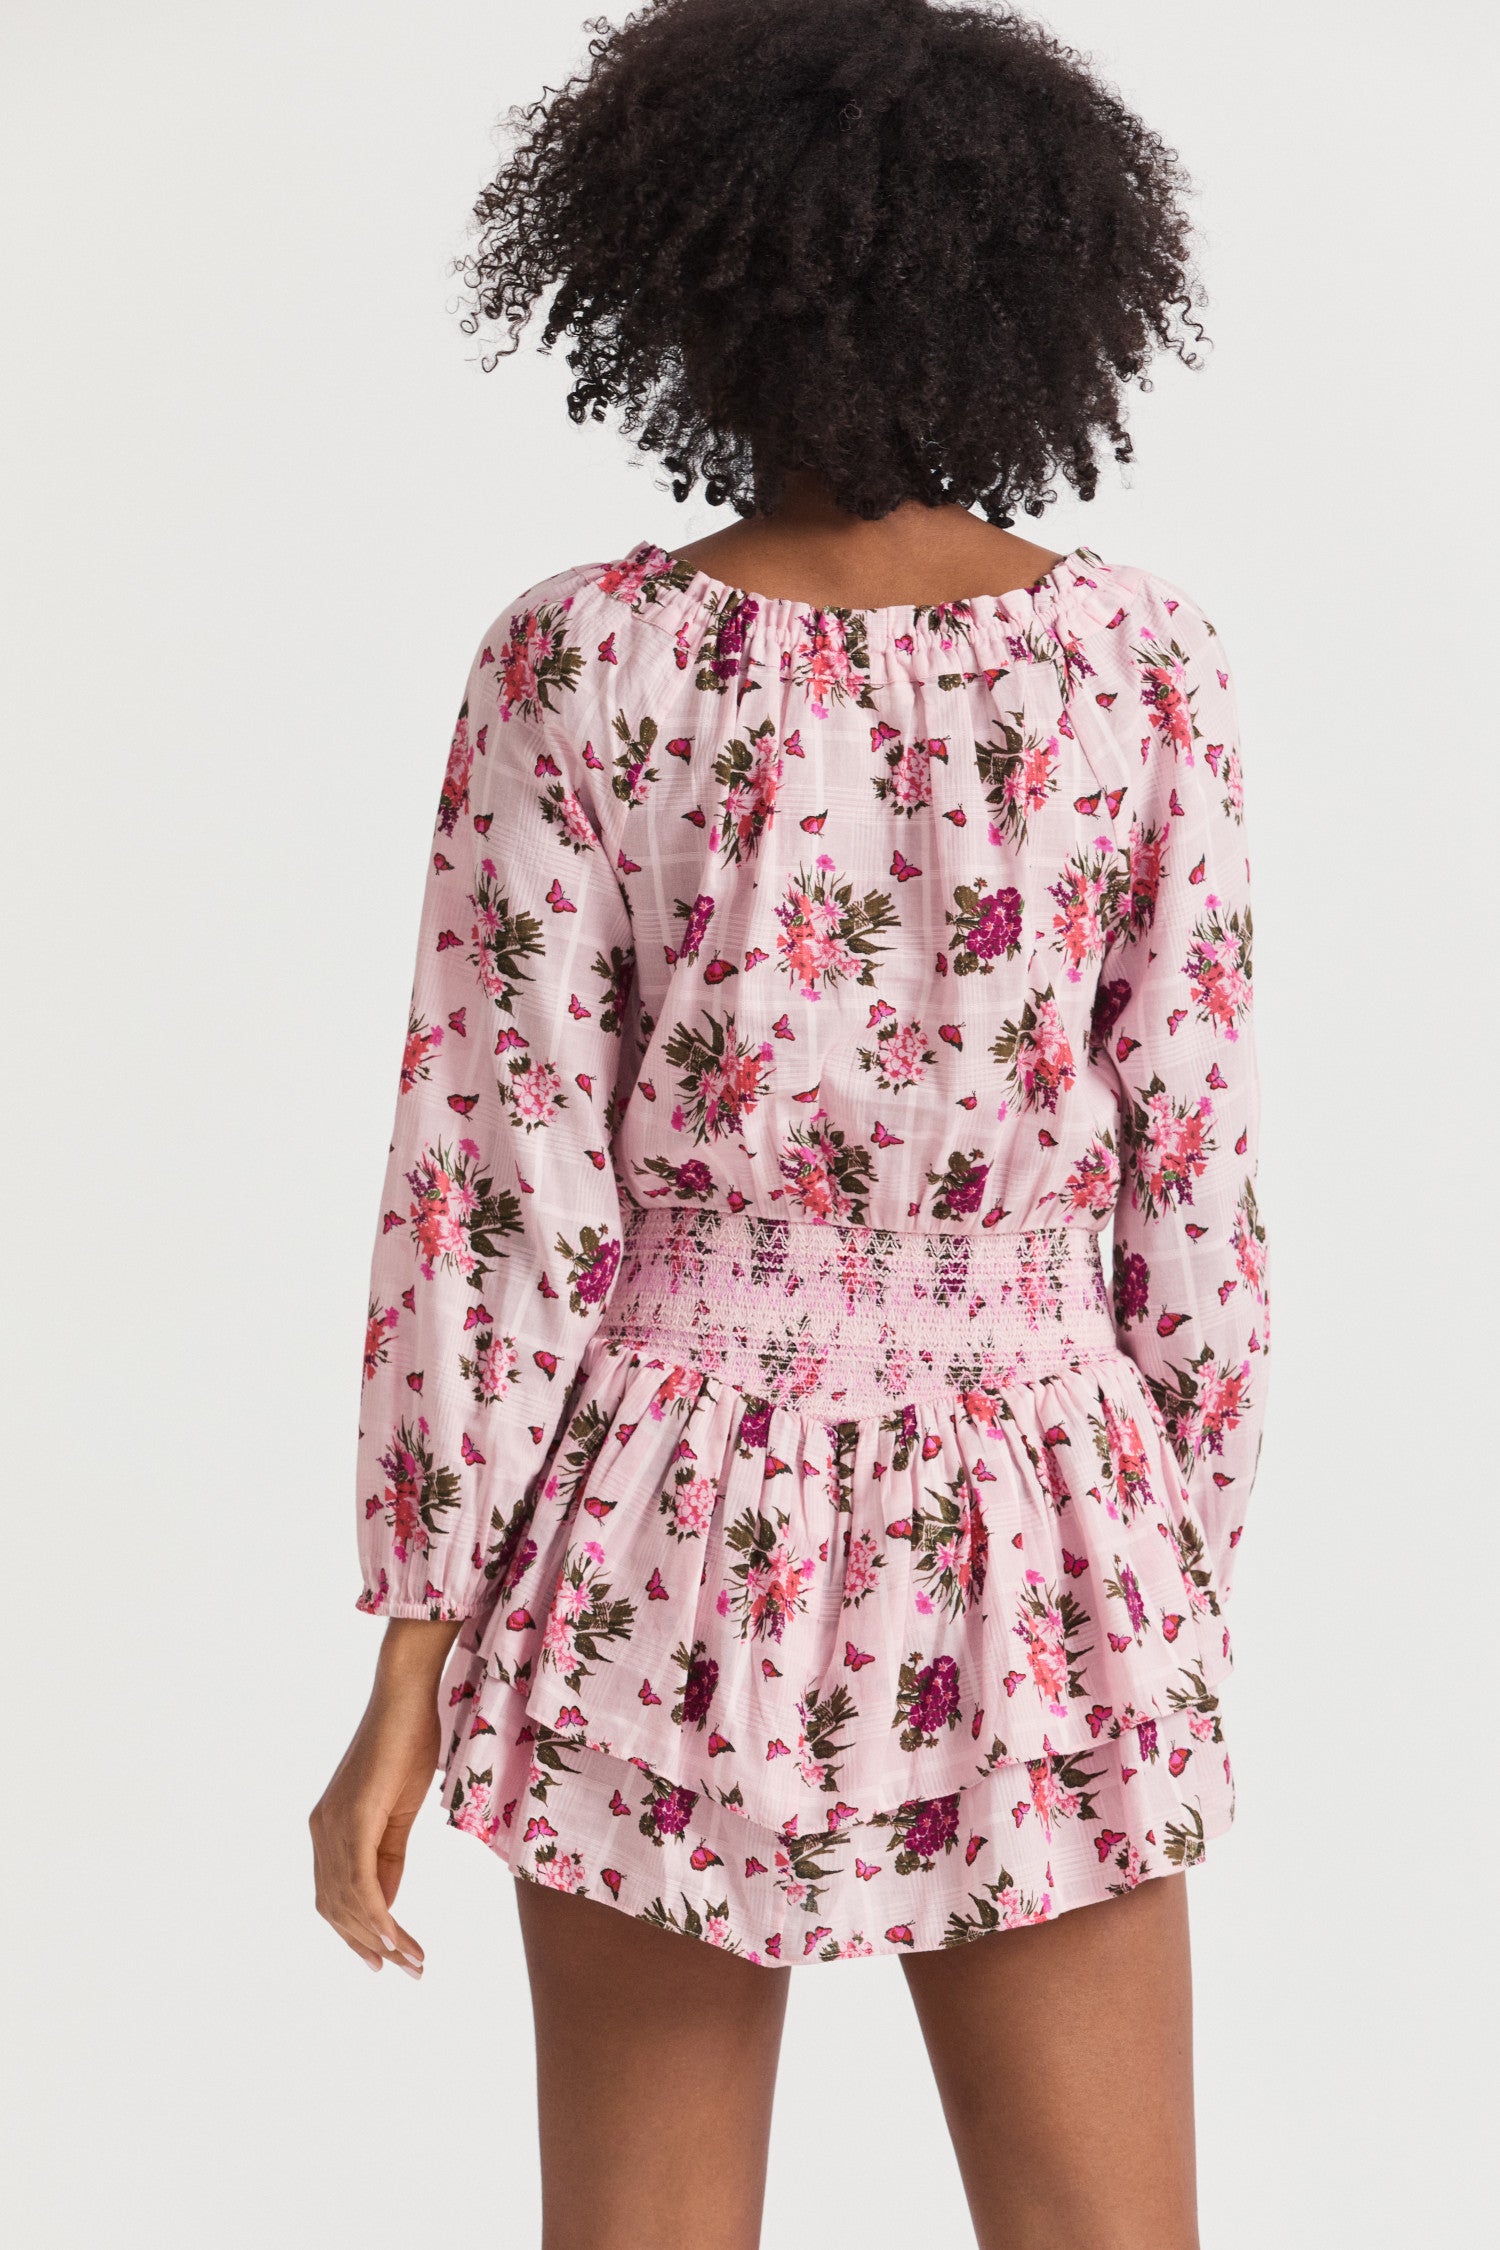 Pink mini dress with a pink floral print. Featuring an elasticated neck opening with a tie at the front, an easy bodice with a stretchy smocked waist that releases into a tiered skirt that hikes up slightly on each side.